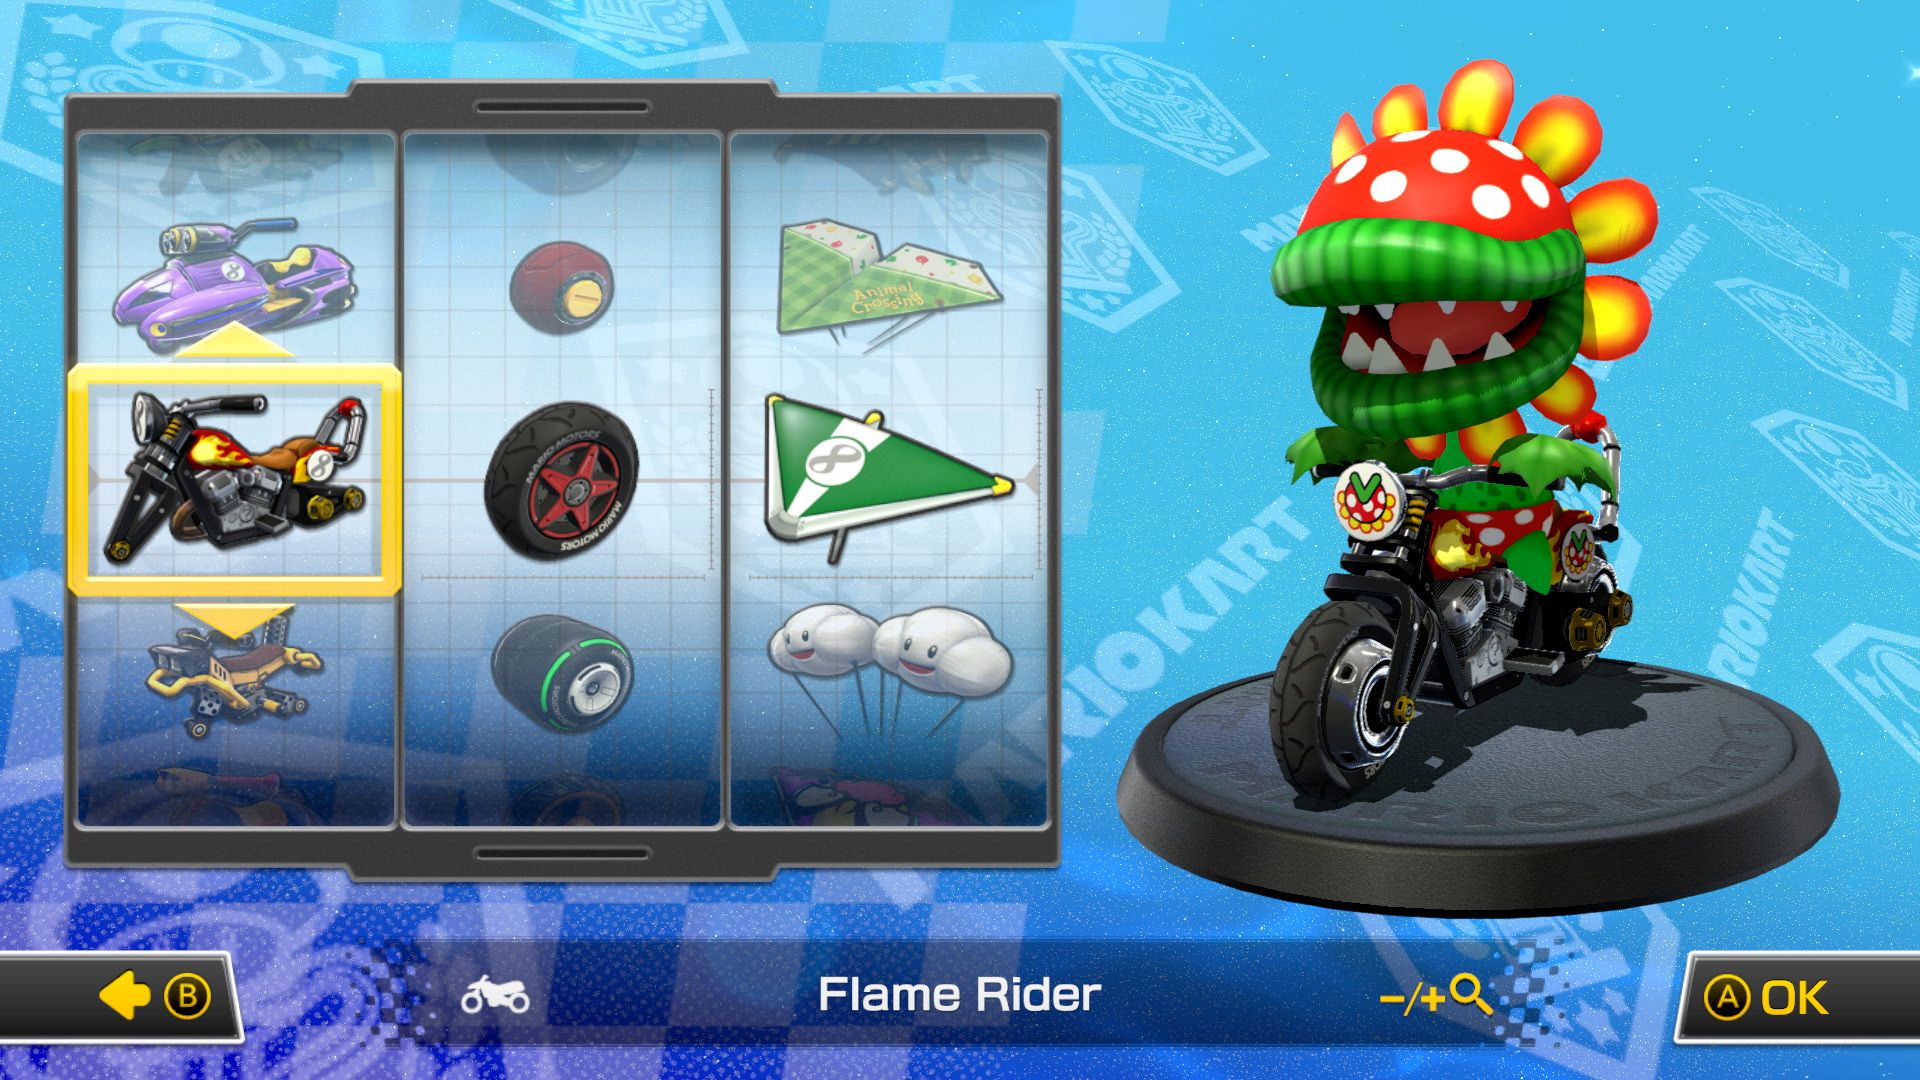 images/products/sw_switch_mario_kart_8_deluxe/_dlc/booster_course_pass/wave5/booster_chars_peteypiranha_scr2.jpg